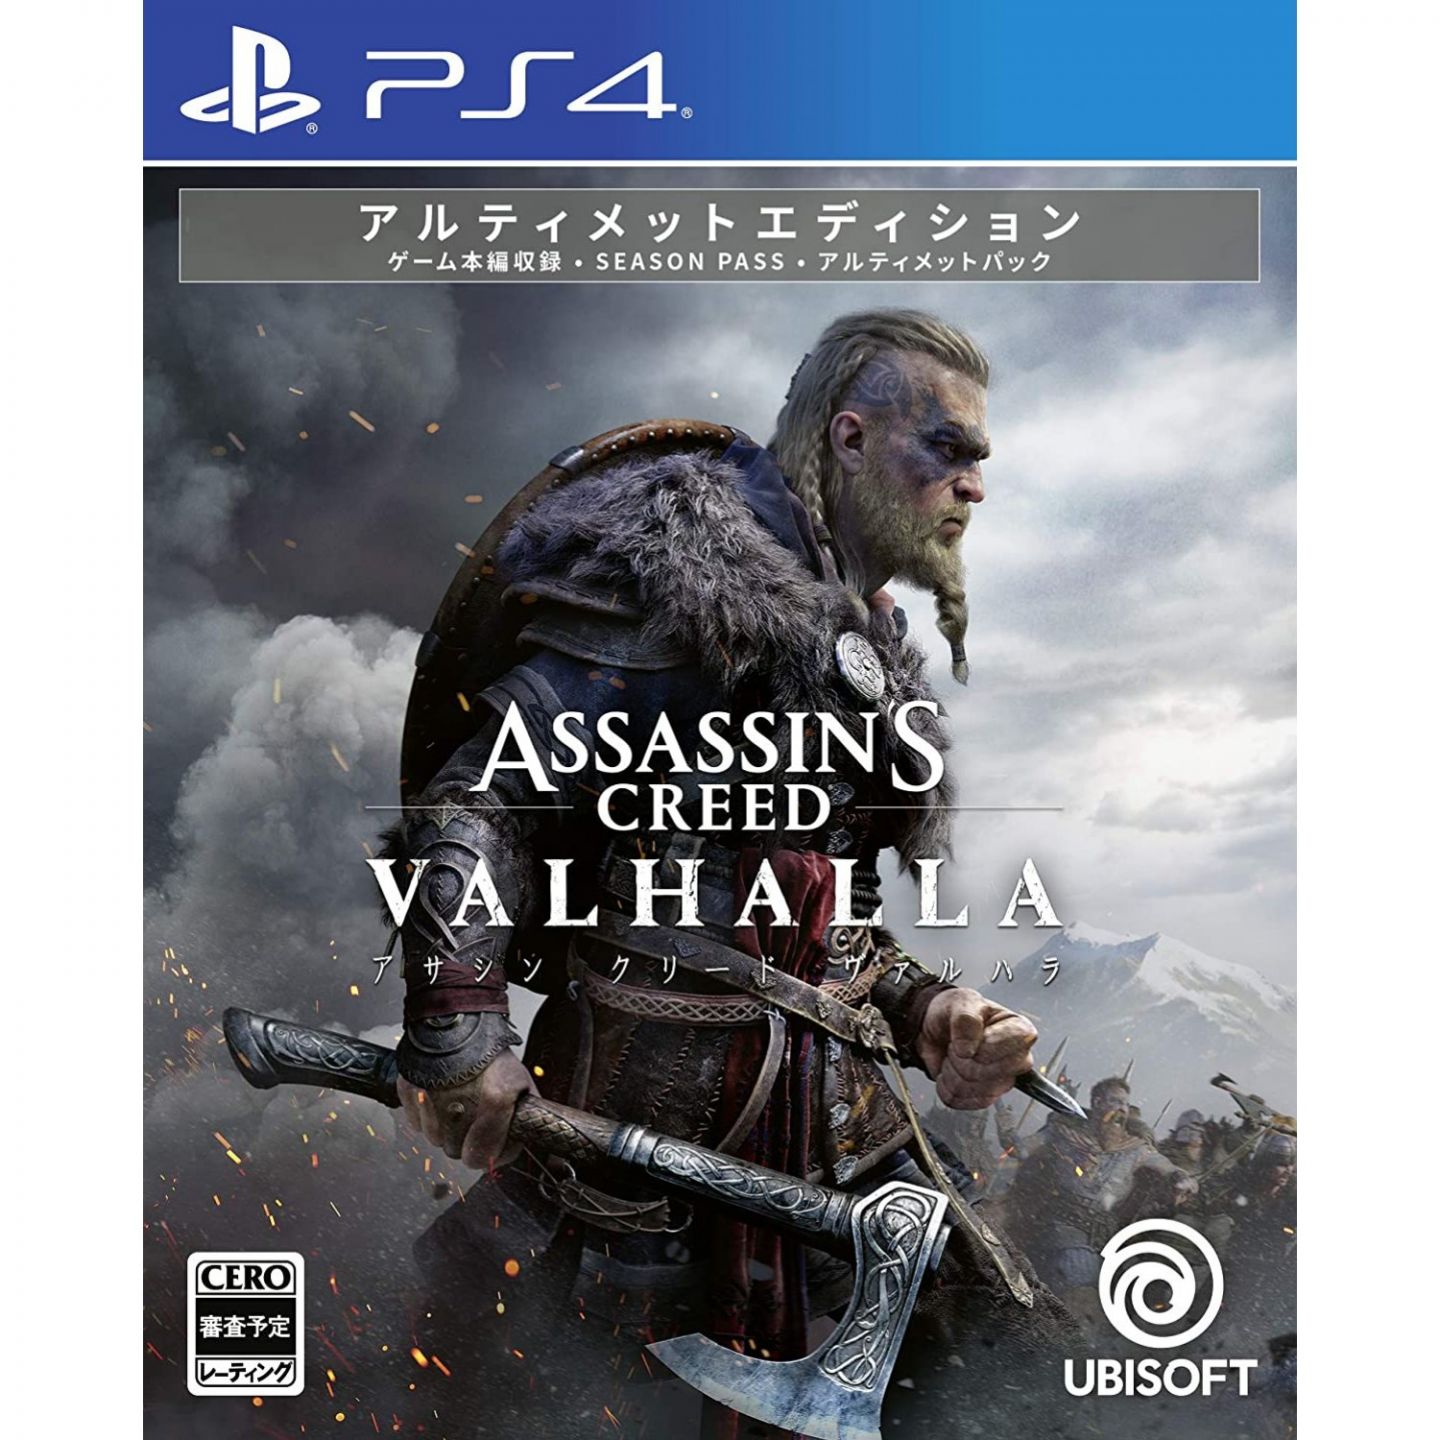 ASSASSIN'S CREED VALHALLA ULTIMATE EDITION Playstation 4 PS4